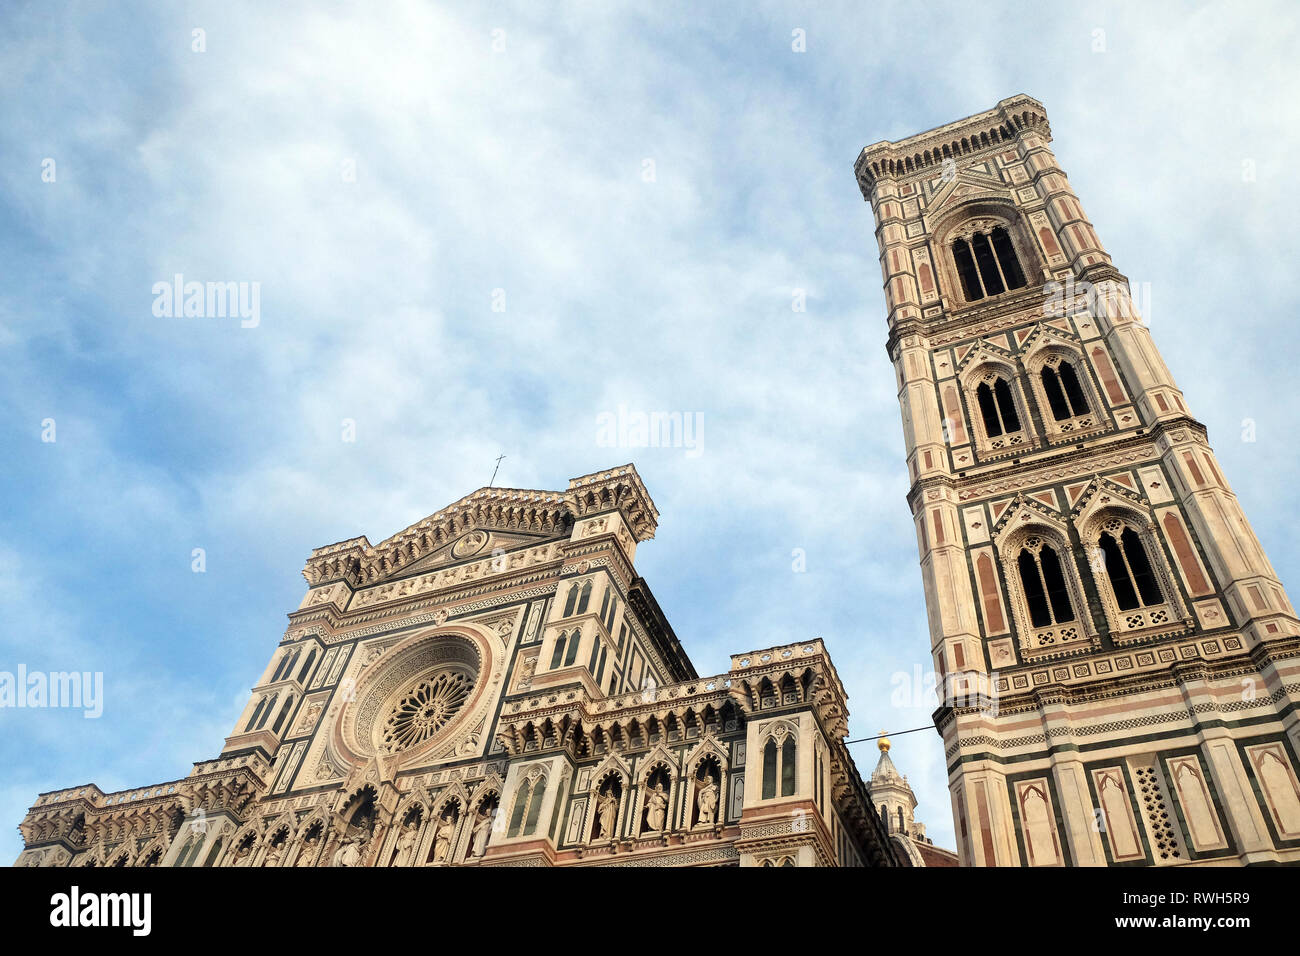 Cattedrale di Santa Maria del Fiore (Cathedral of Saint Mary of the Flower), Florence, Italy Stock Photo